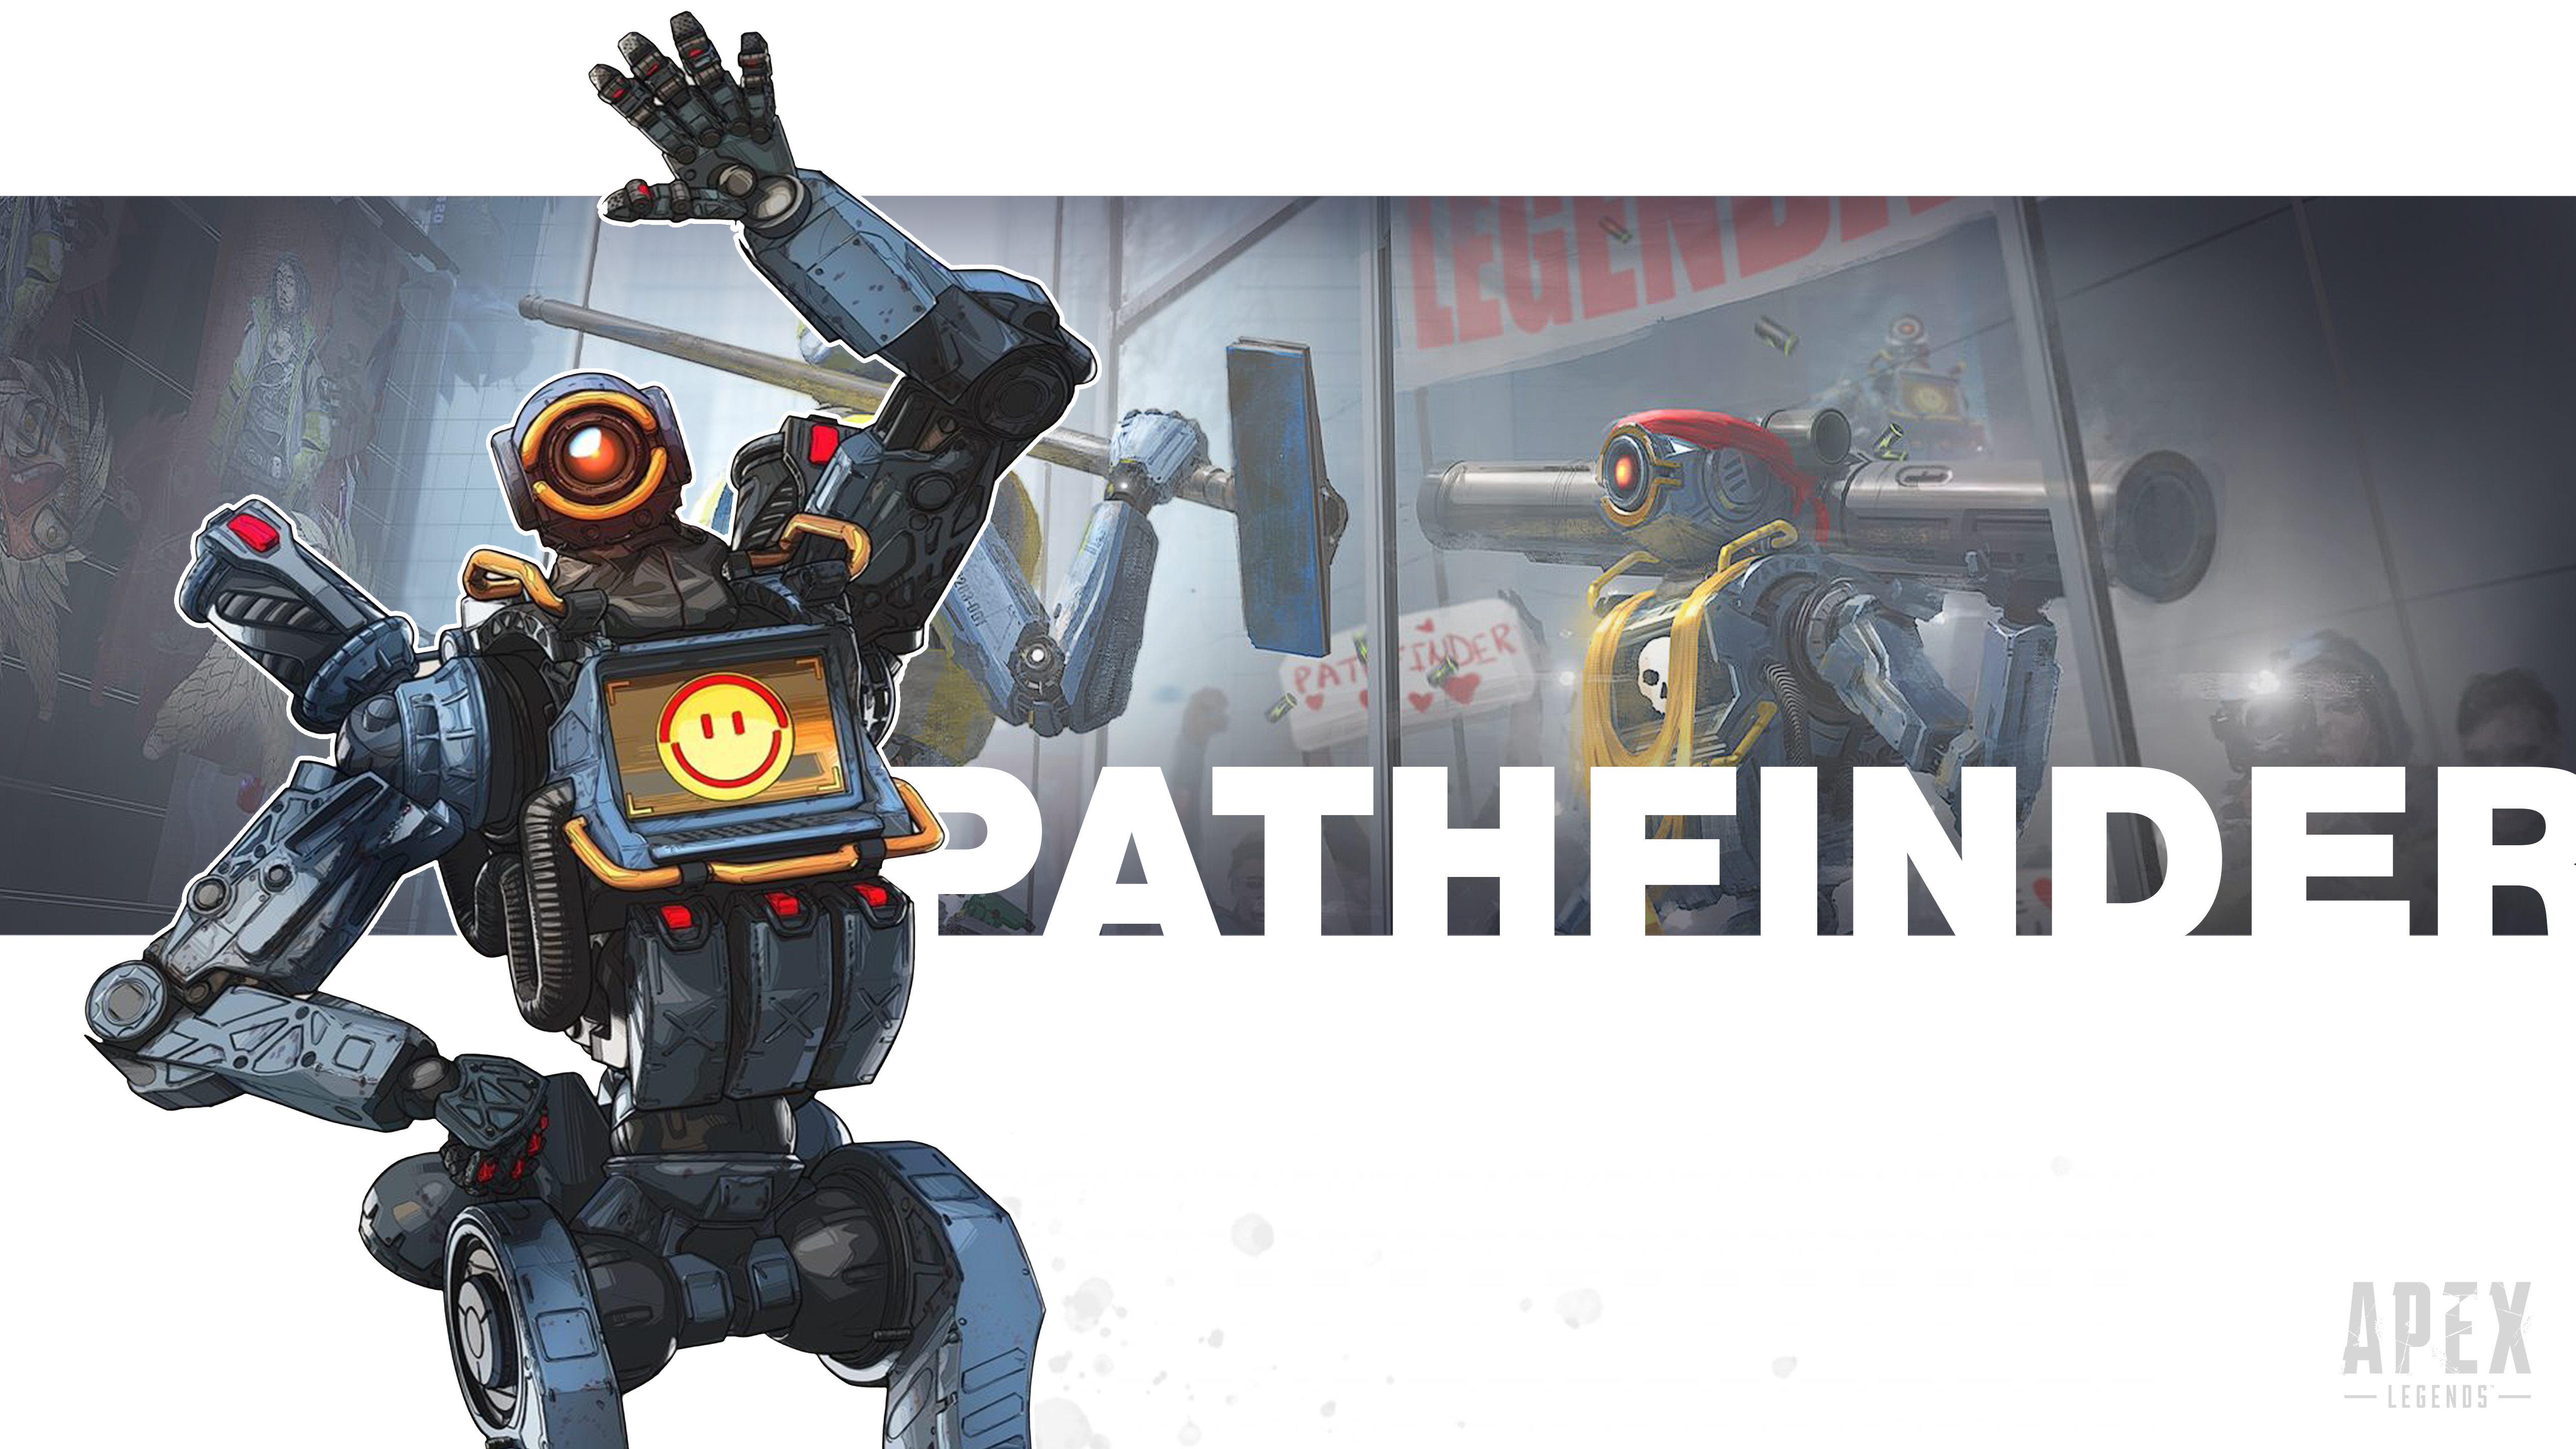 Featured image of post Pathfinder Apex Legends Wallpaper Hd Pathfinder is the fastest legend and here s how to get good with the grappling hook zipline gun and find the next ring s location